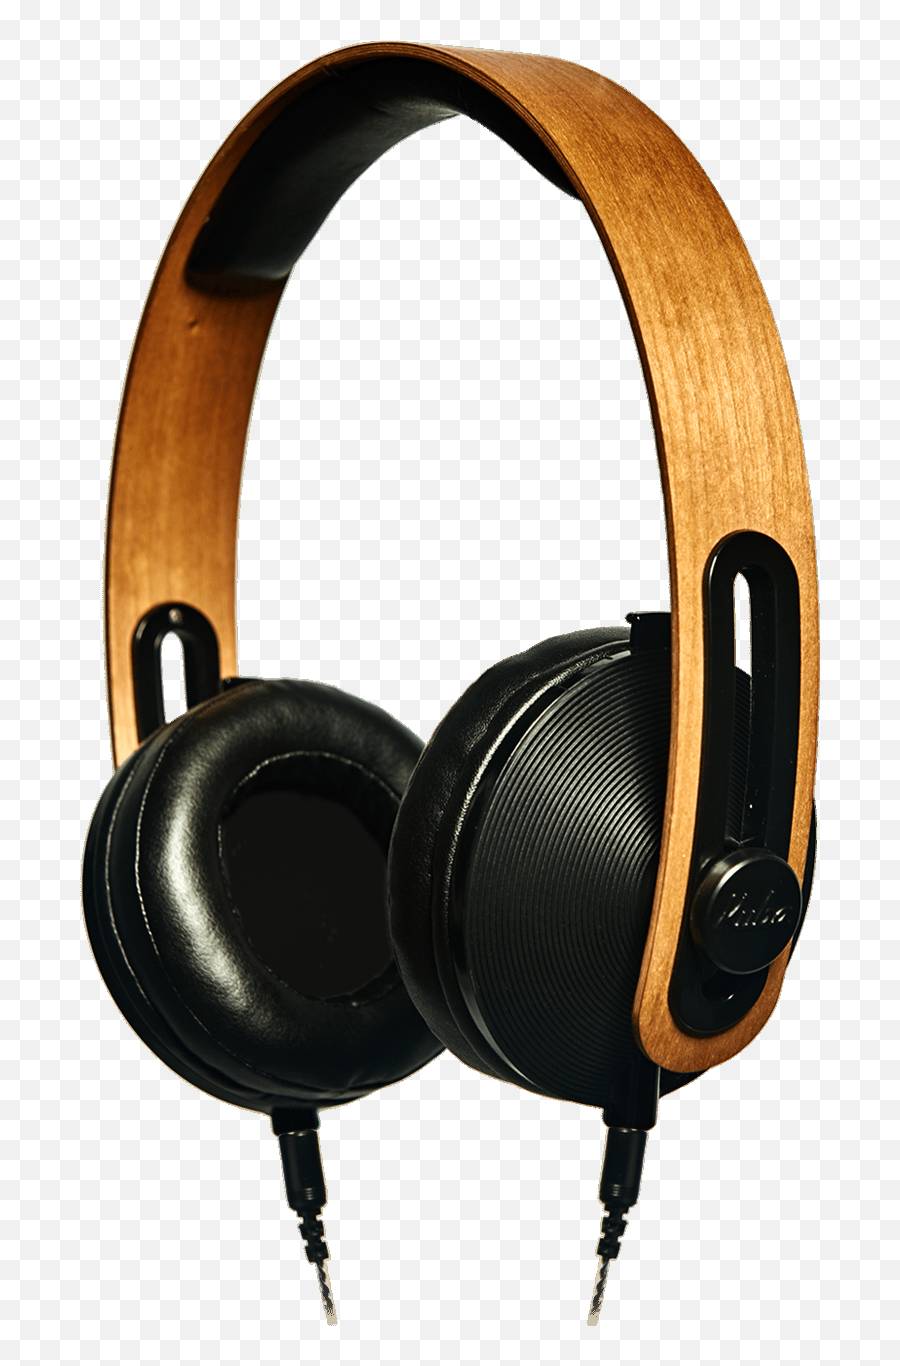 Discussions Of Headphone Design And Their Designers - Headphones Emoji,Emoji Headphones